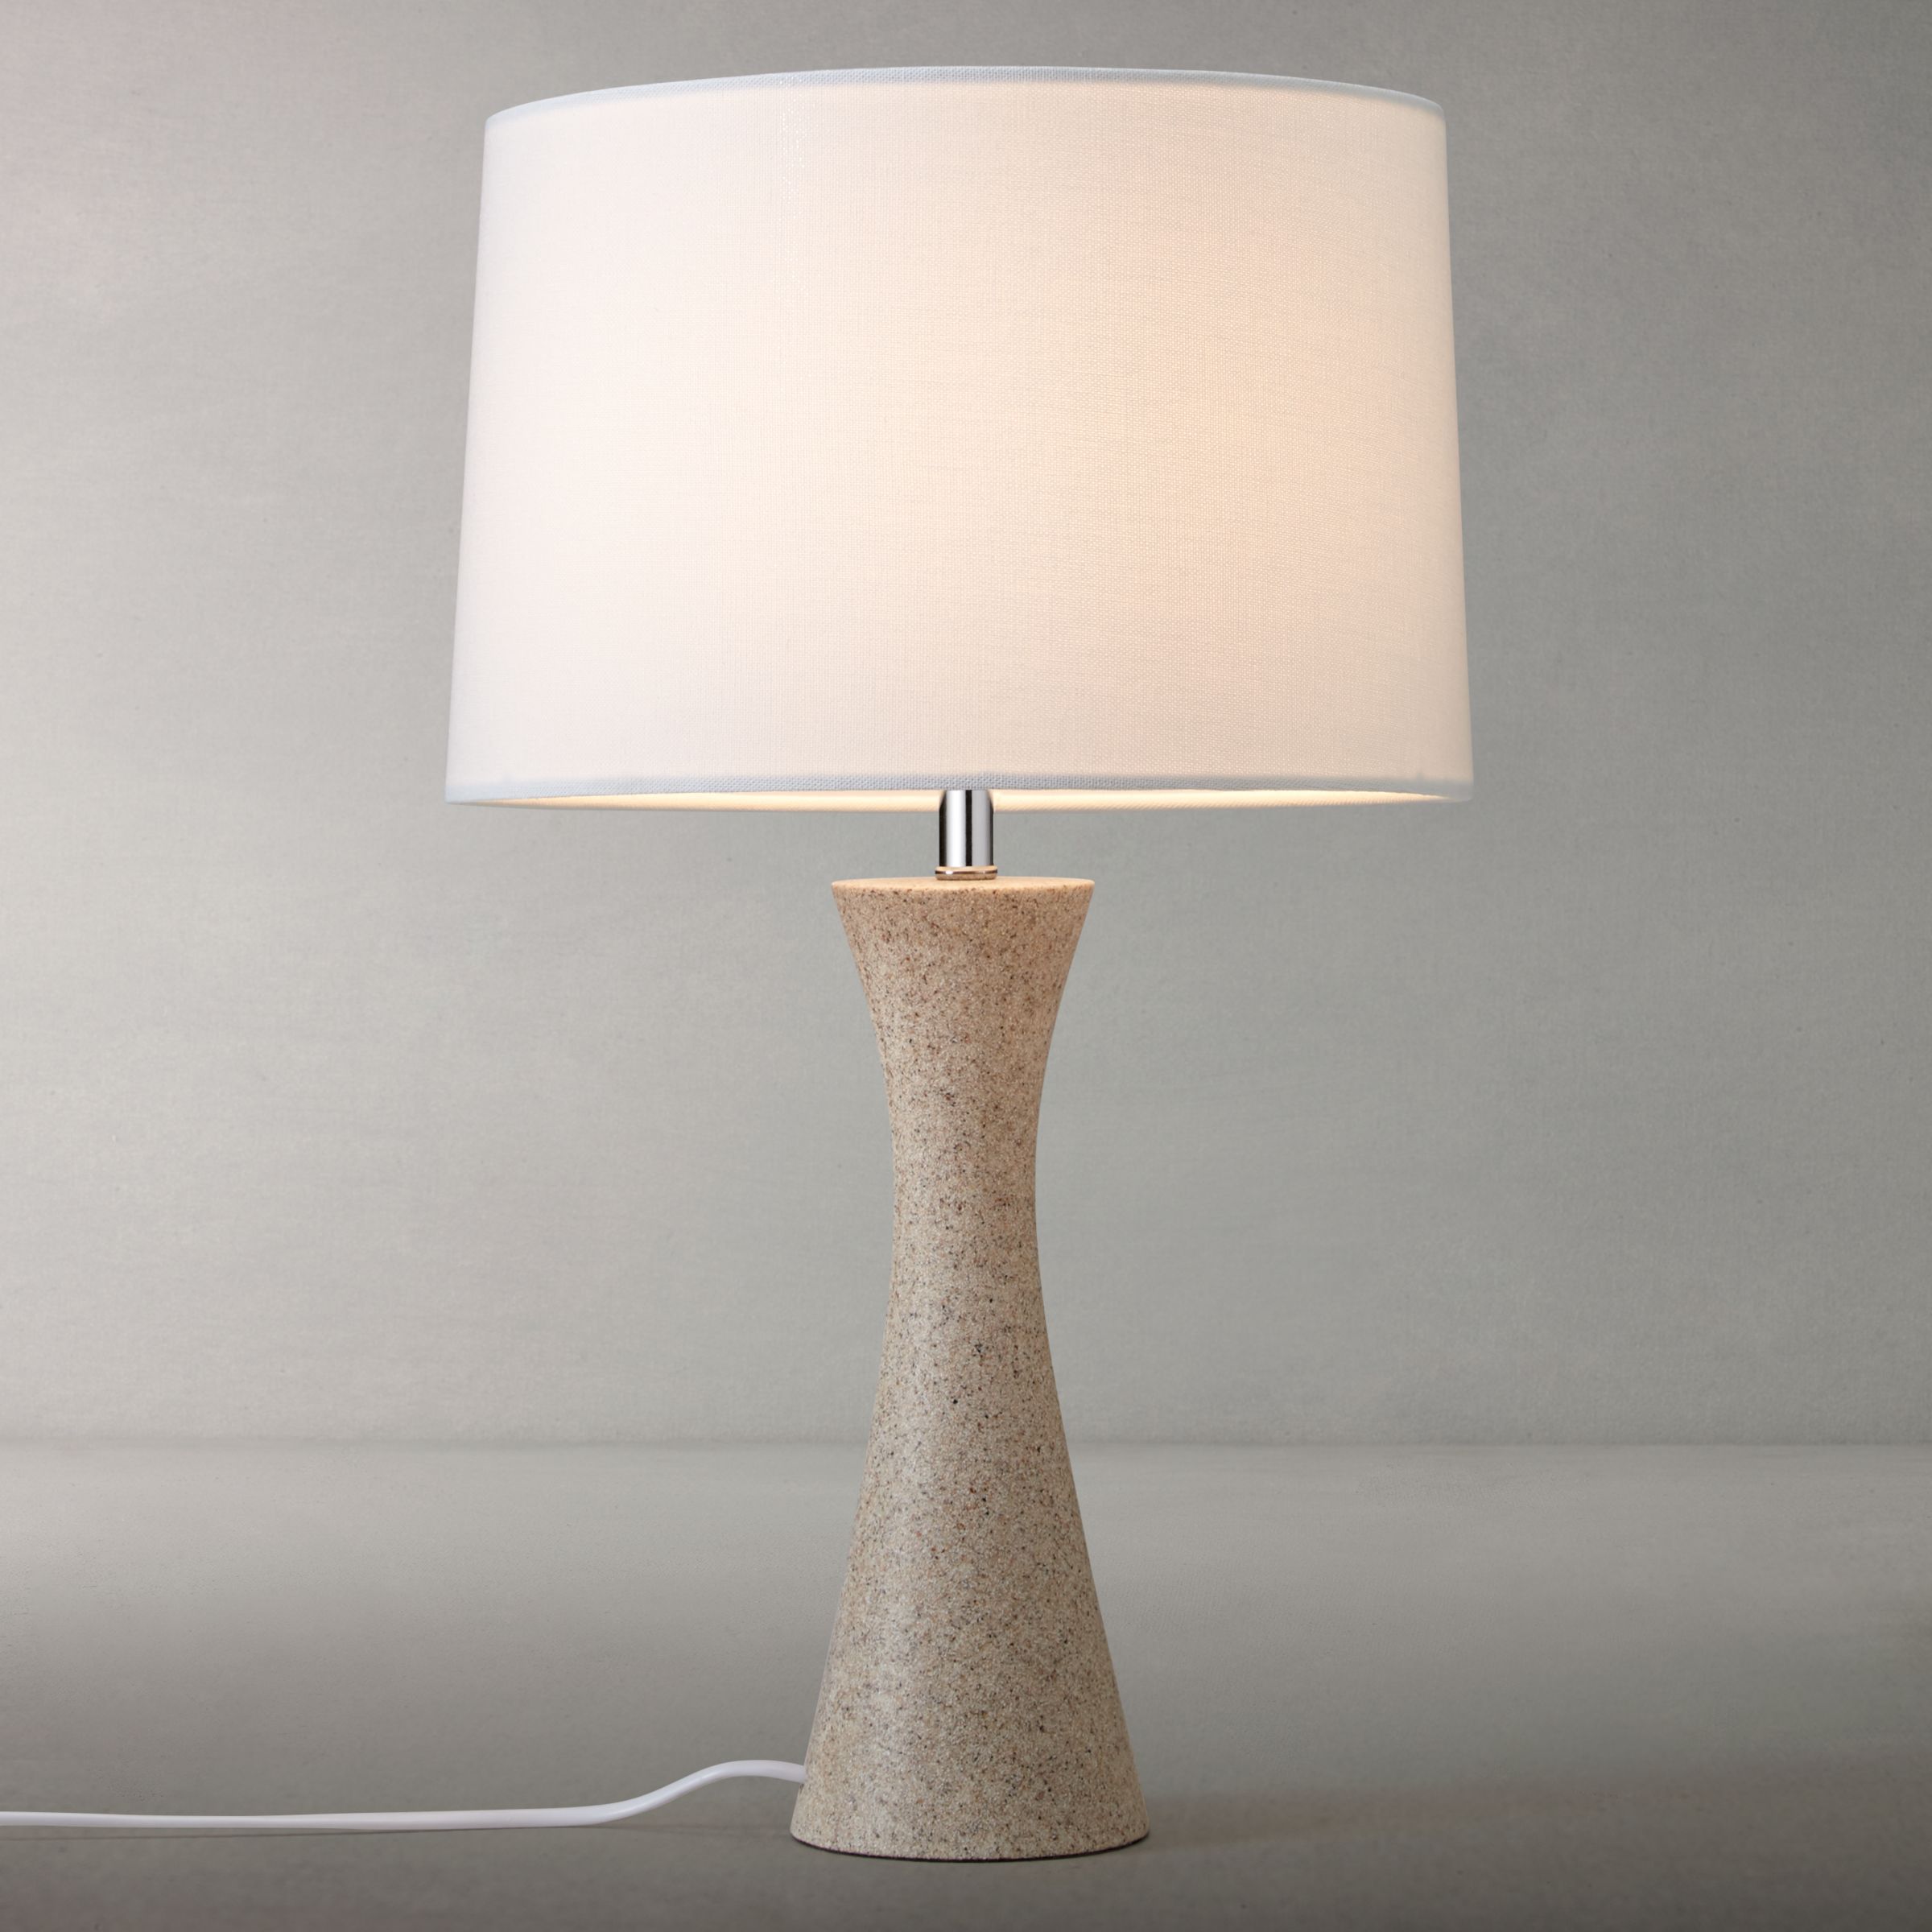 natural stone table lamps